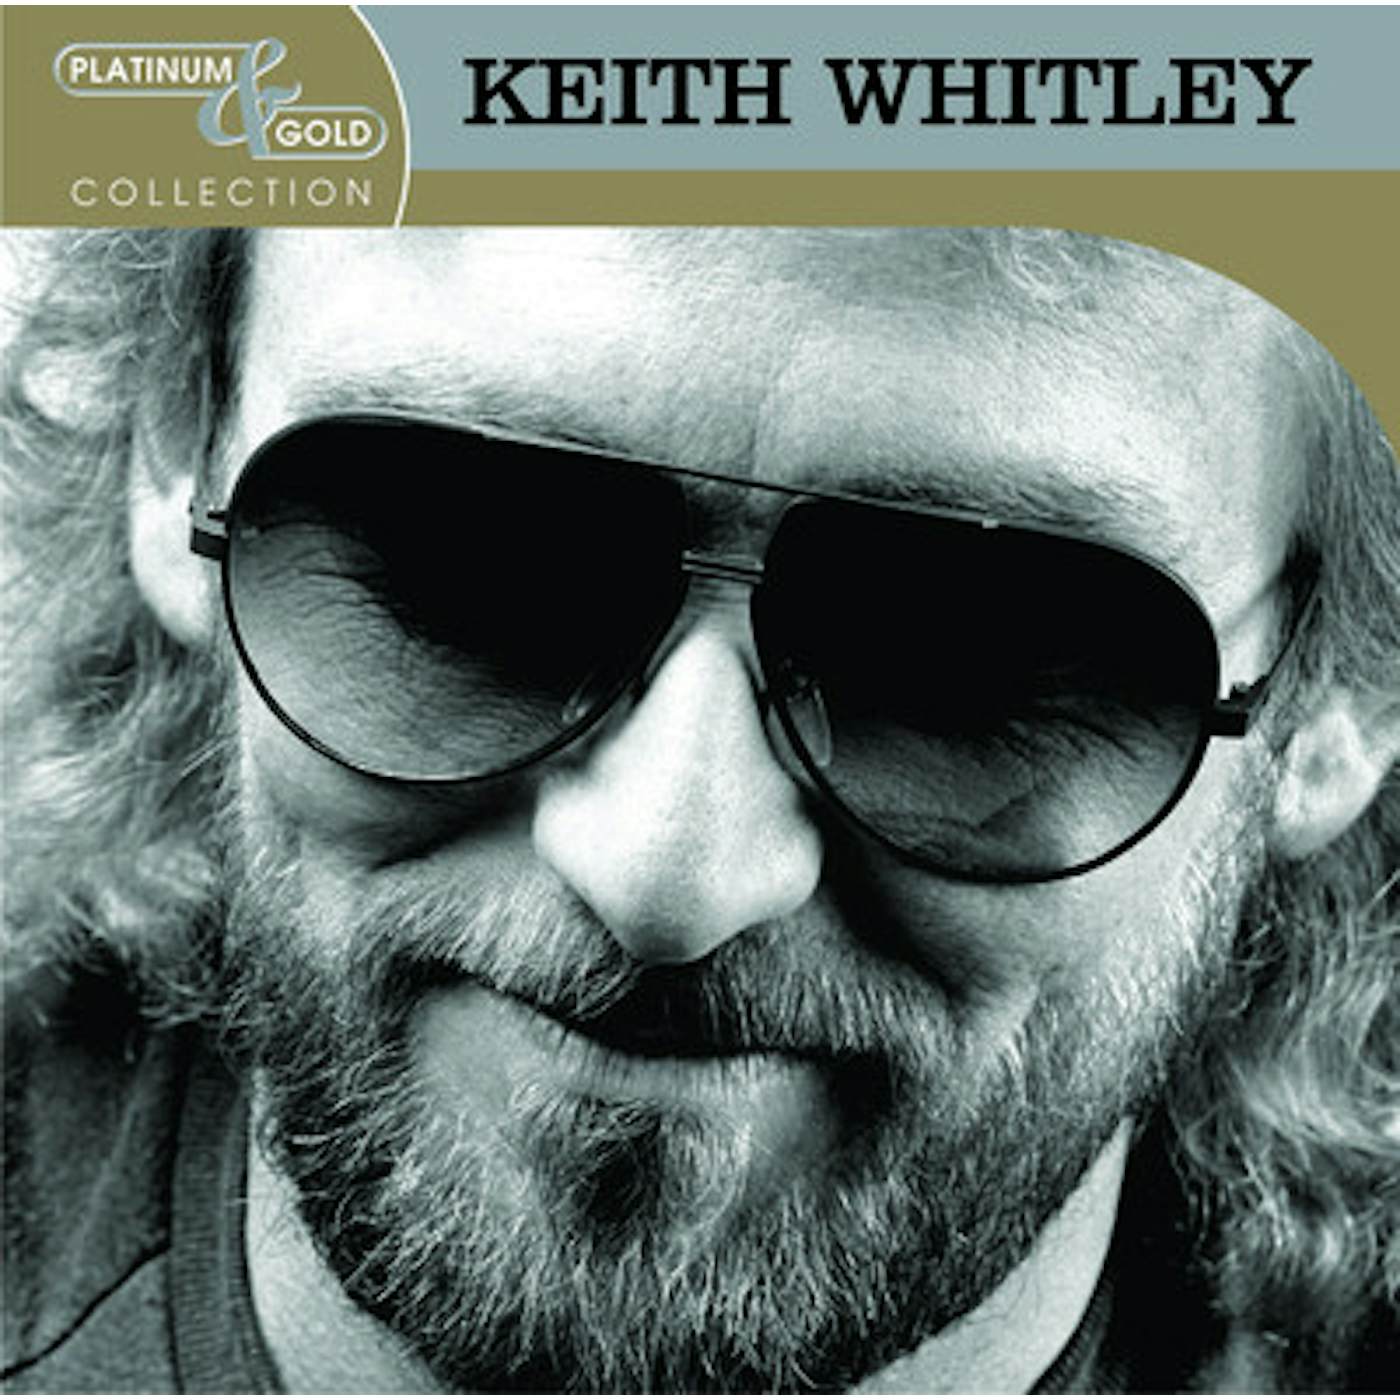 Keith Whitley PLATINUM & GOLD COLLECTION CD